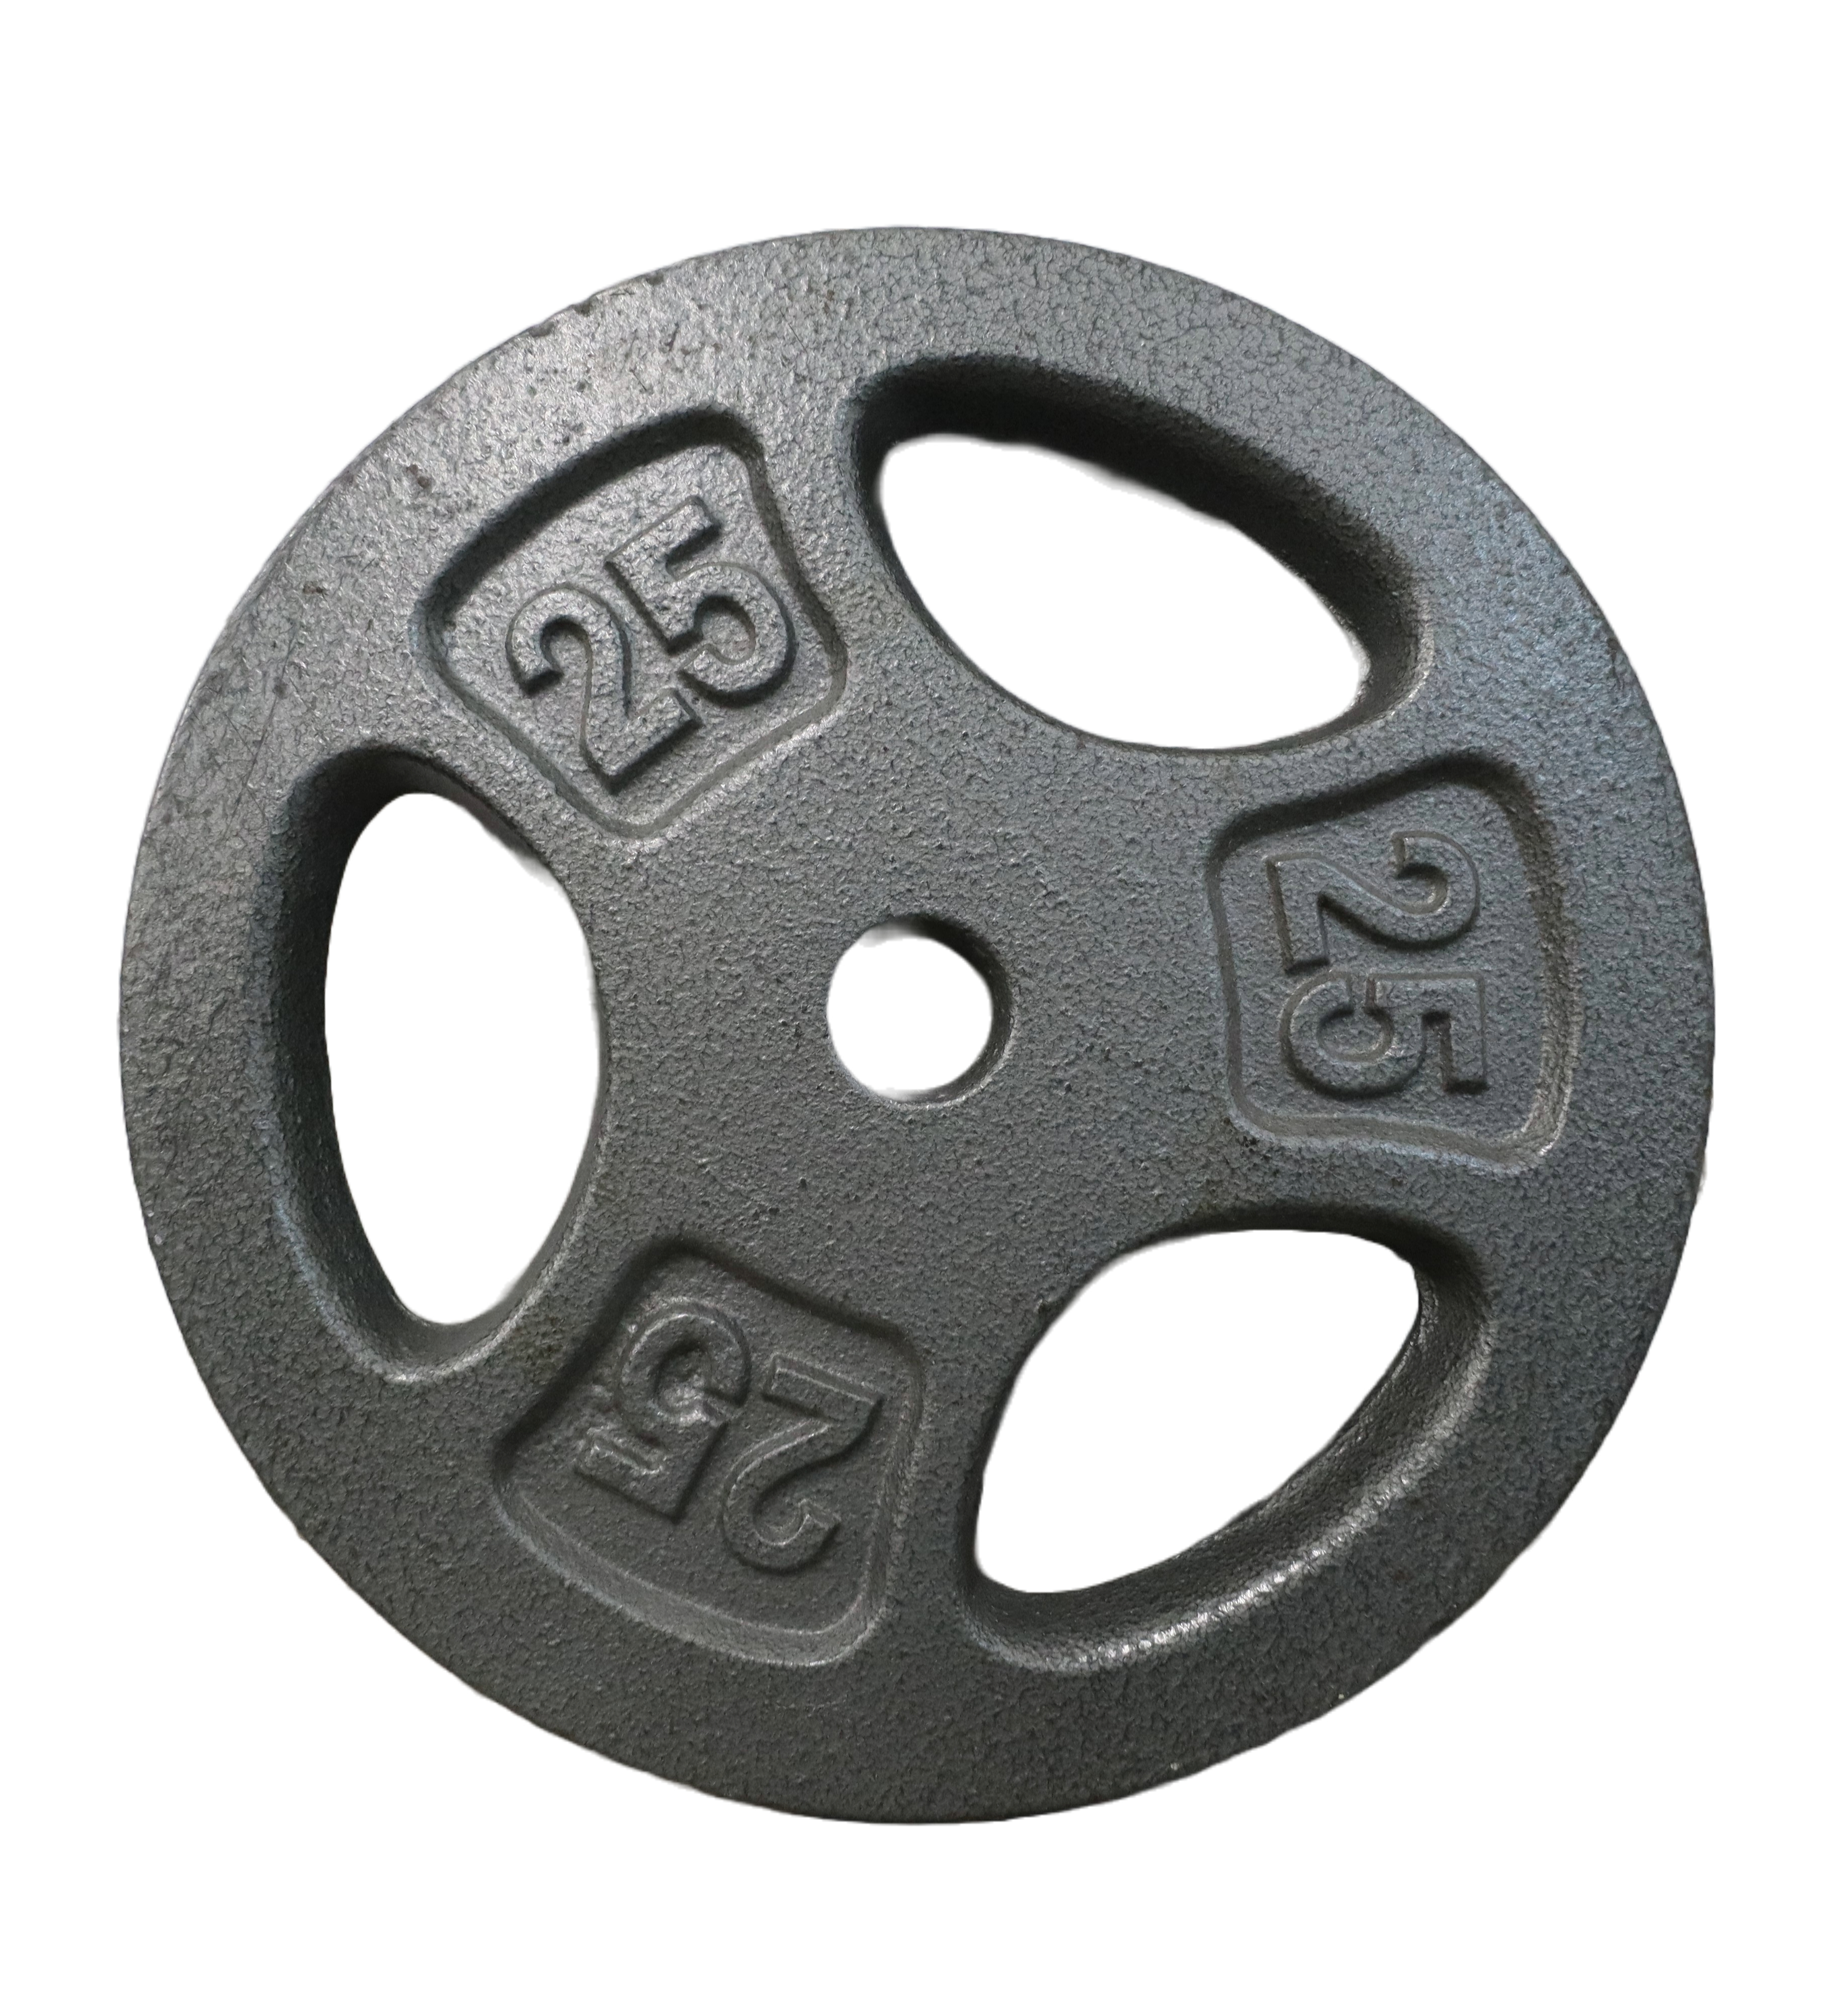 Used CAP Barbell 25lb Standard Grip Weight Plate Freeweights & Accessories